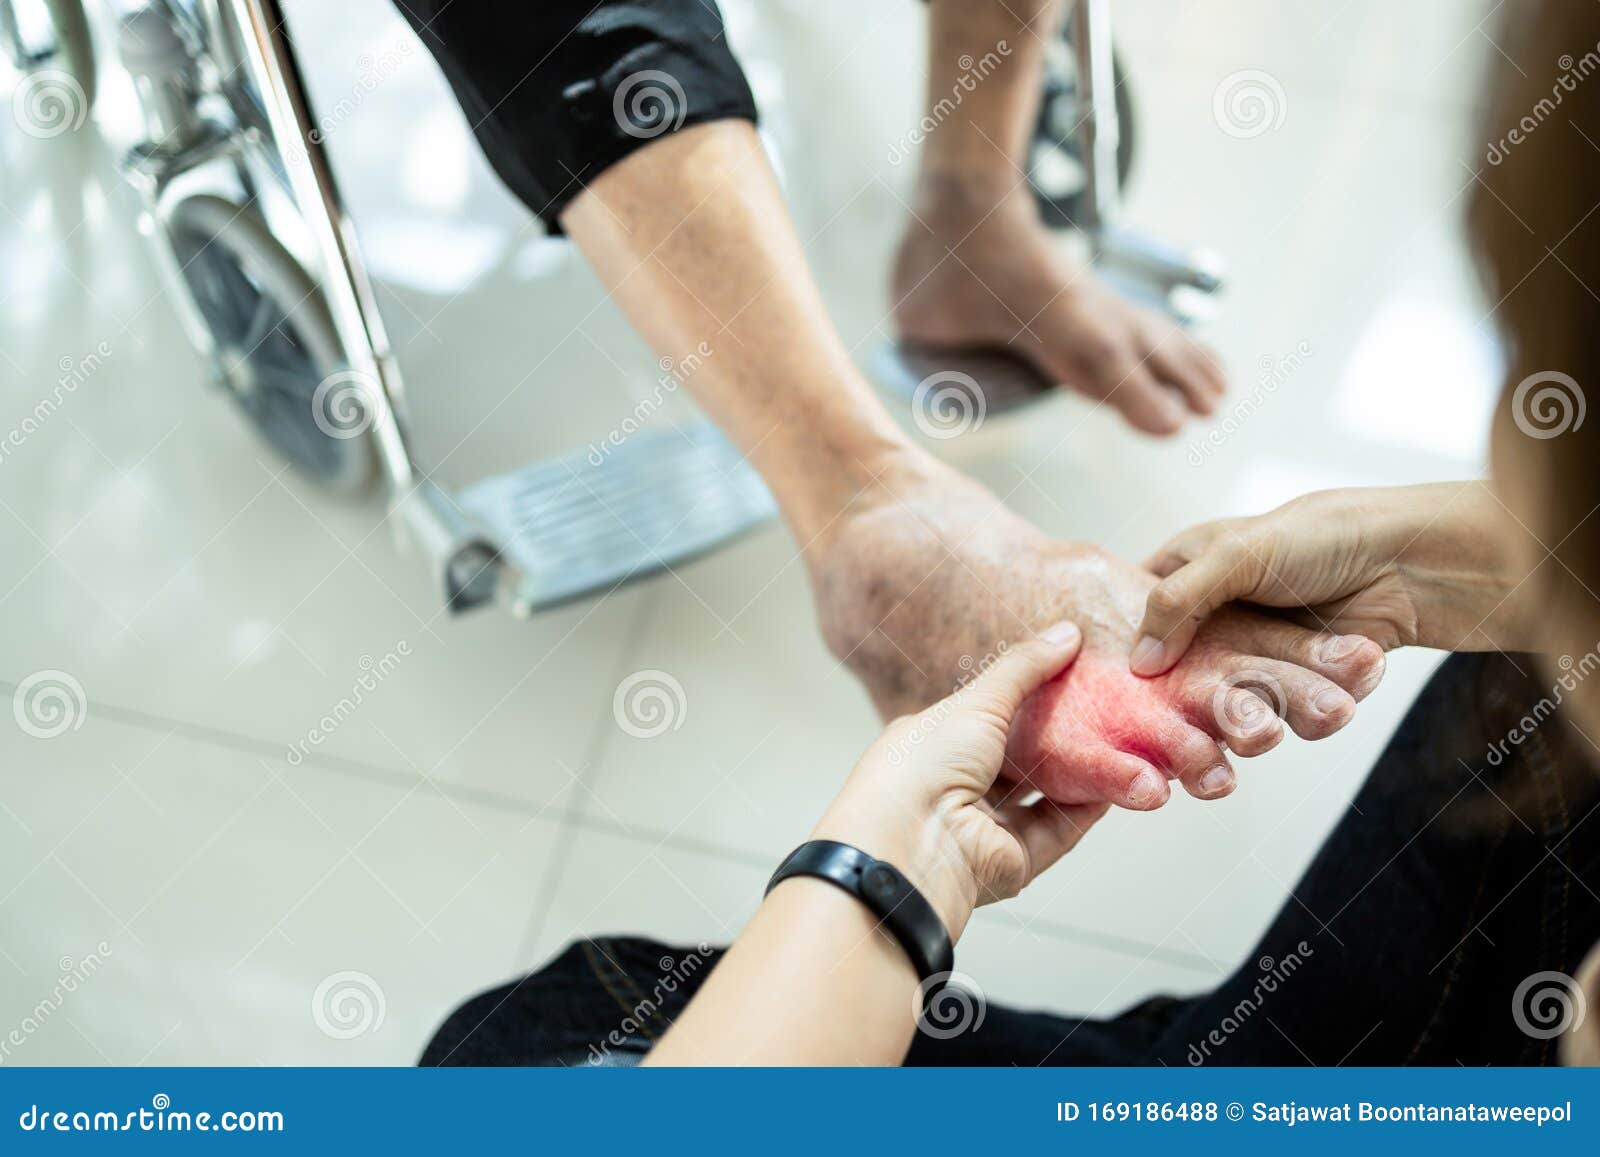 asian senior mother in wheelchair,receiving a foot massage from her daughter,physiology pressing with fingers to relax,old woman